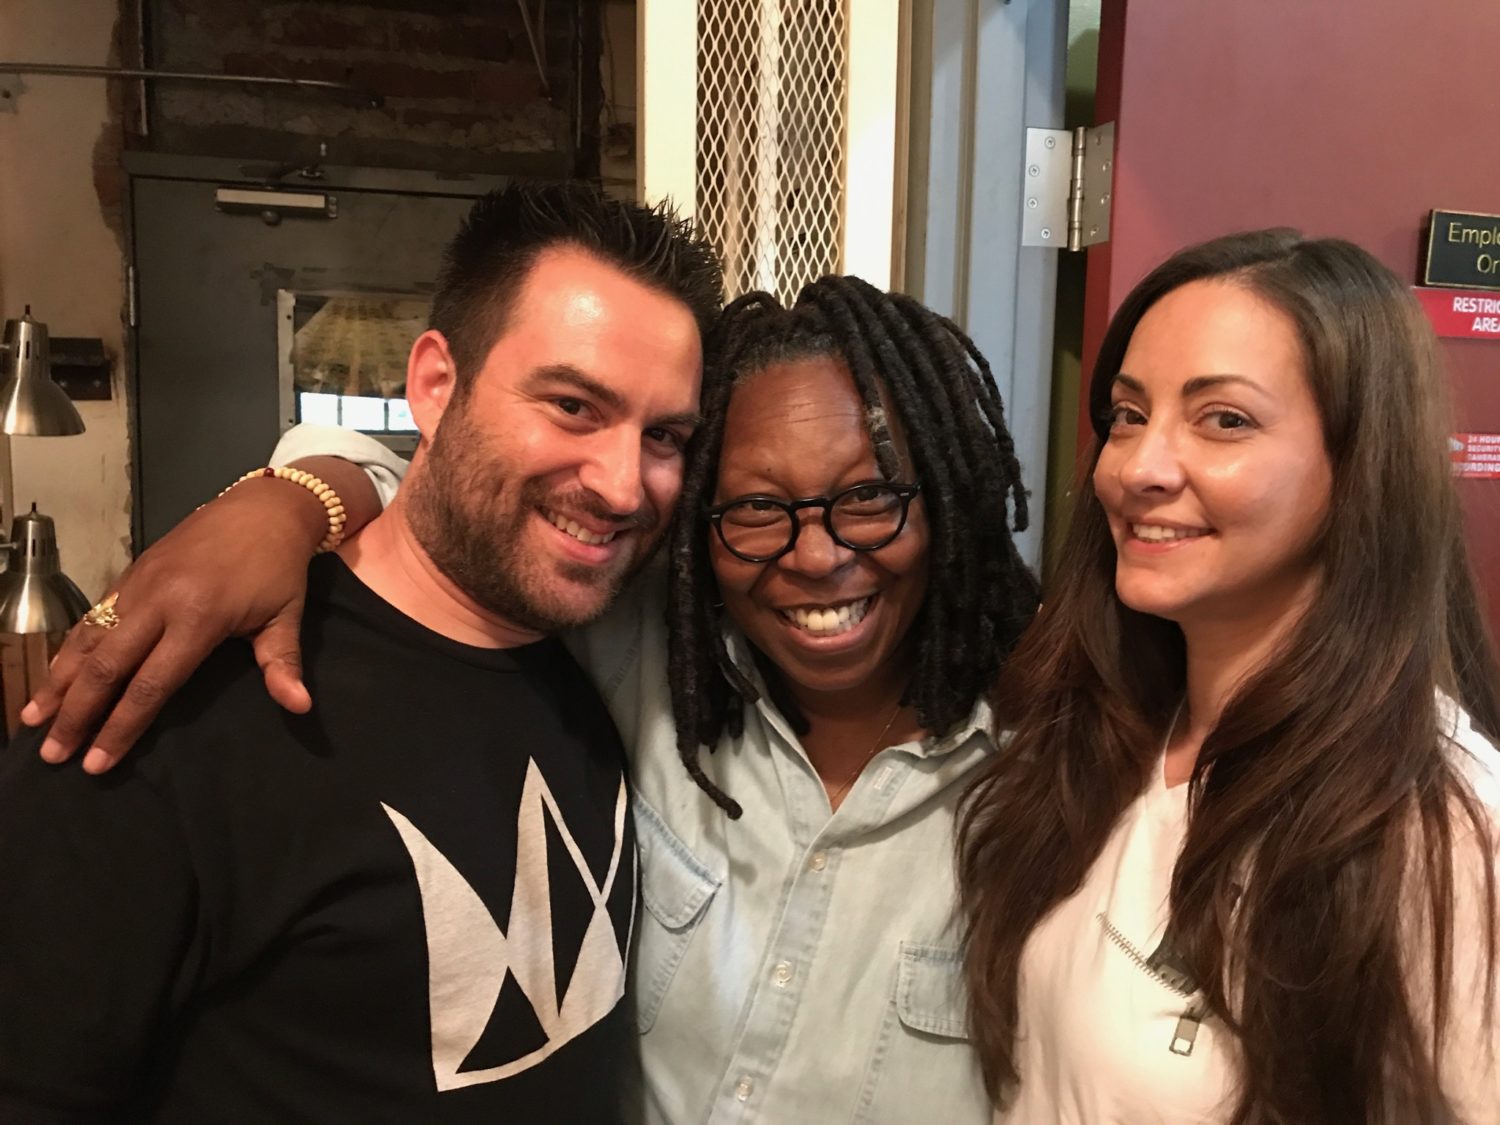 Jason Beck and Dina Browner of AHHS pose with Whoopi Goldberg